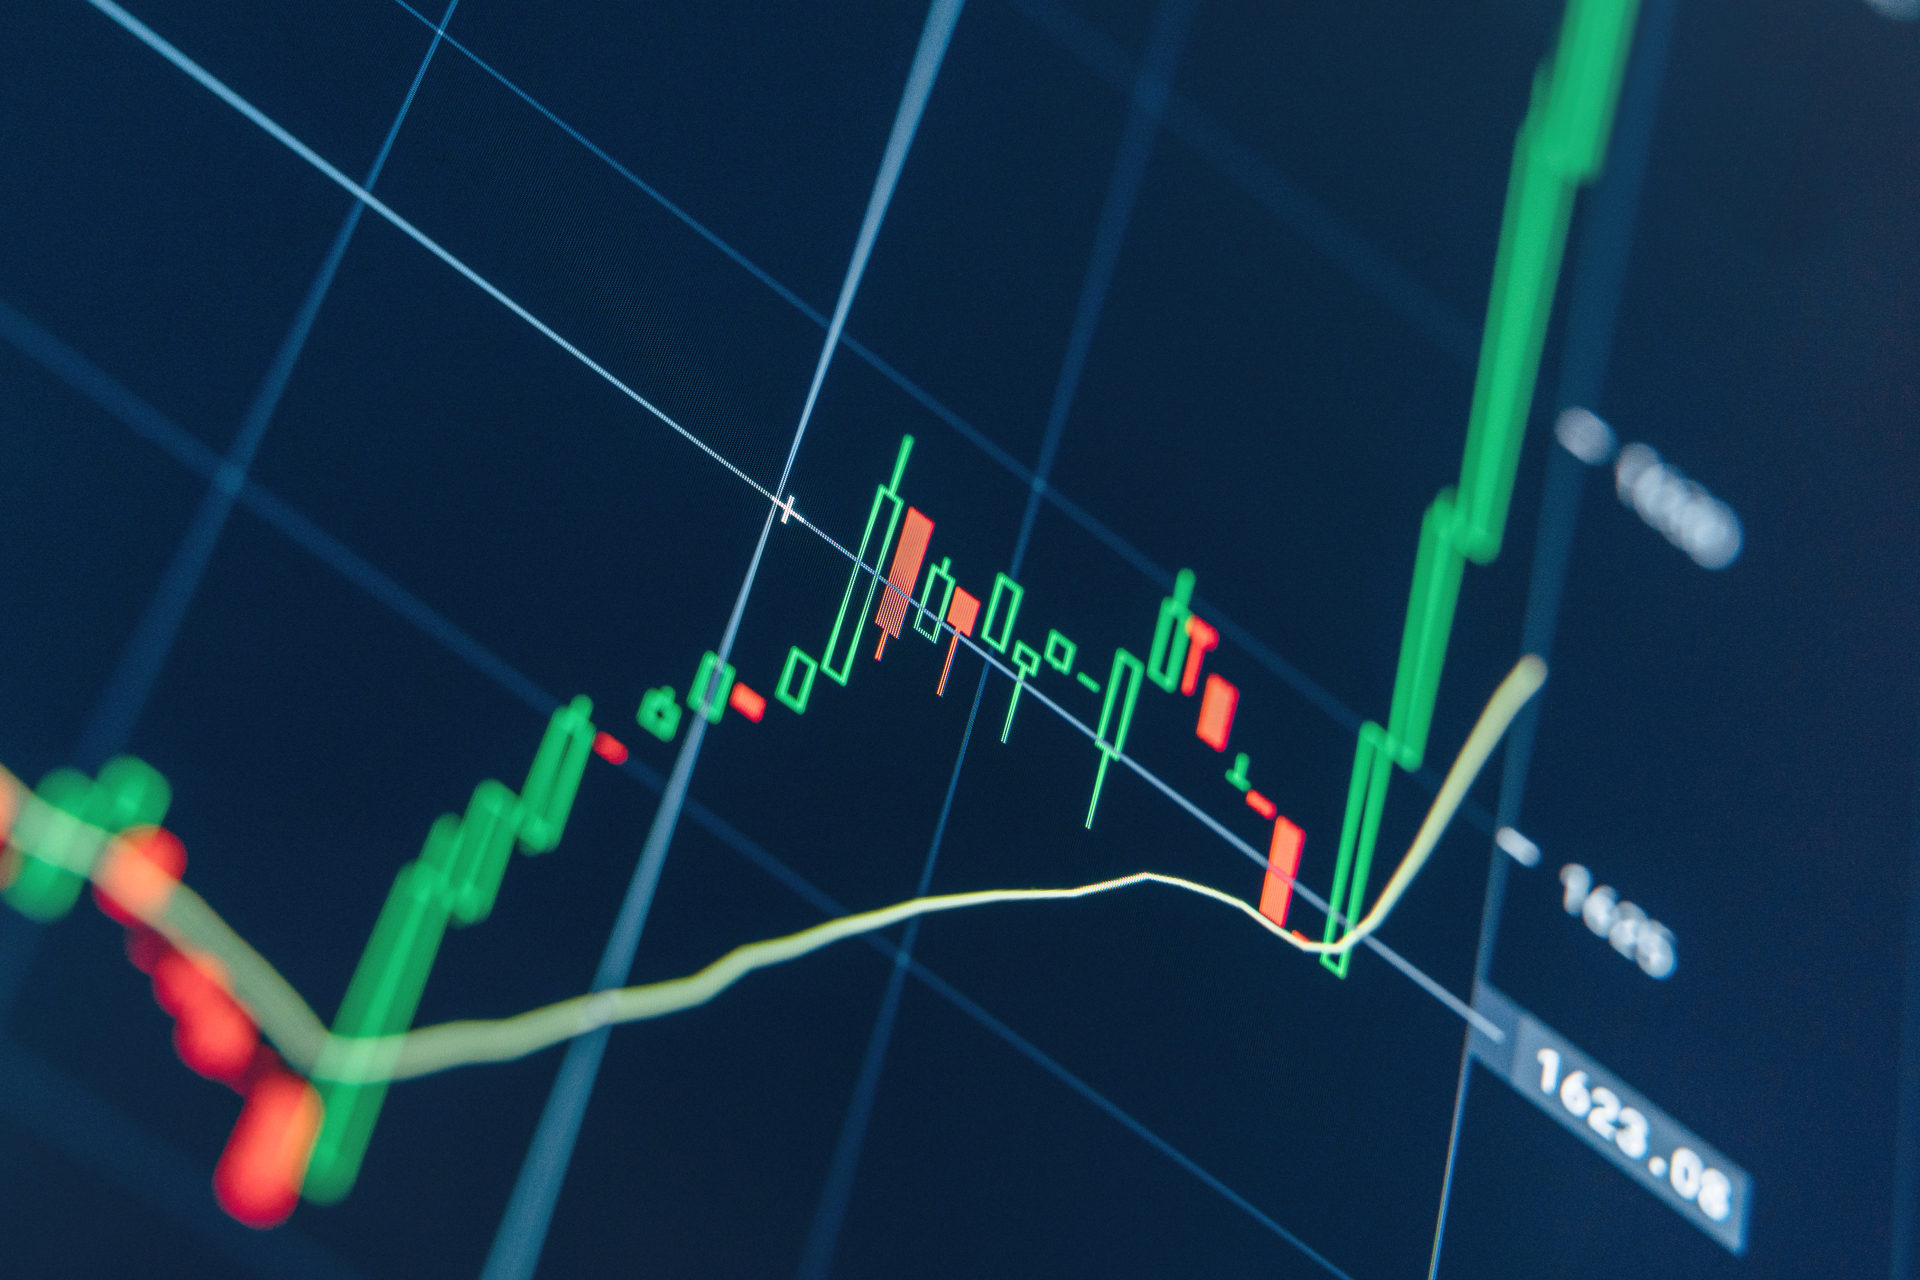 Bitcoin price breaks trendline and blows past $21,000
